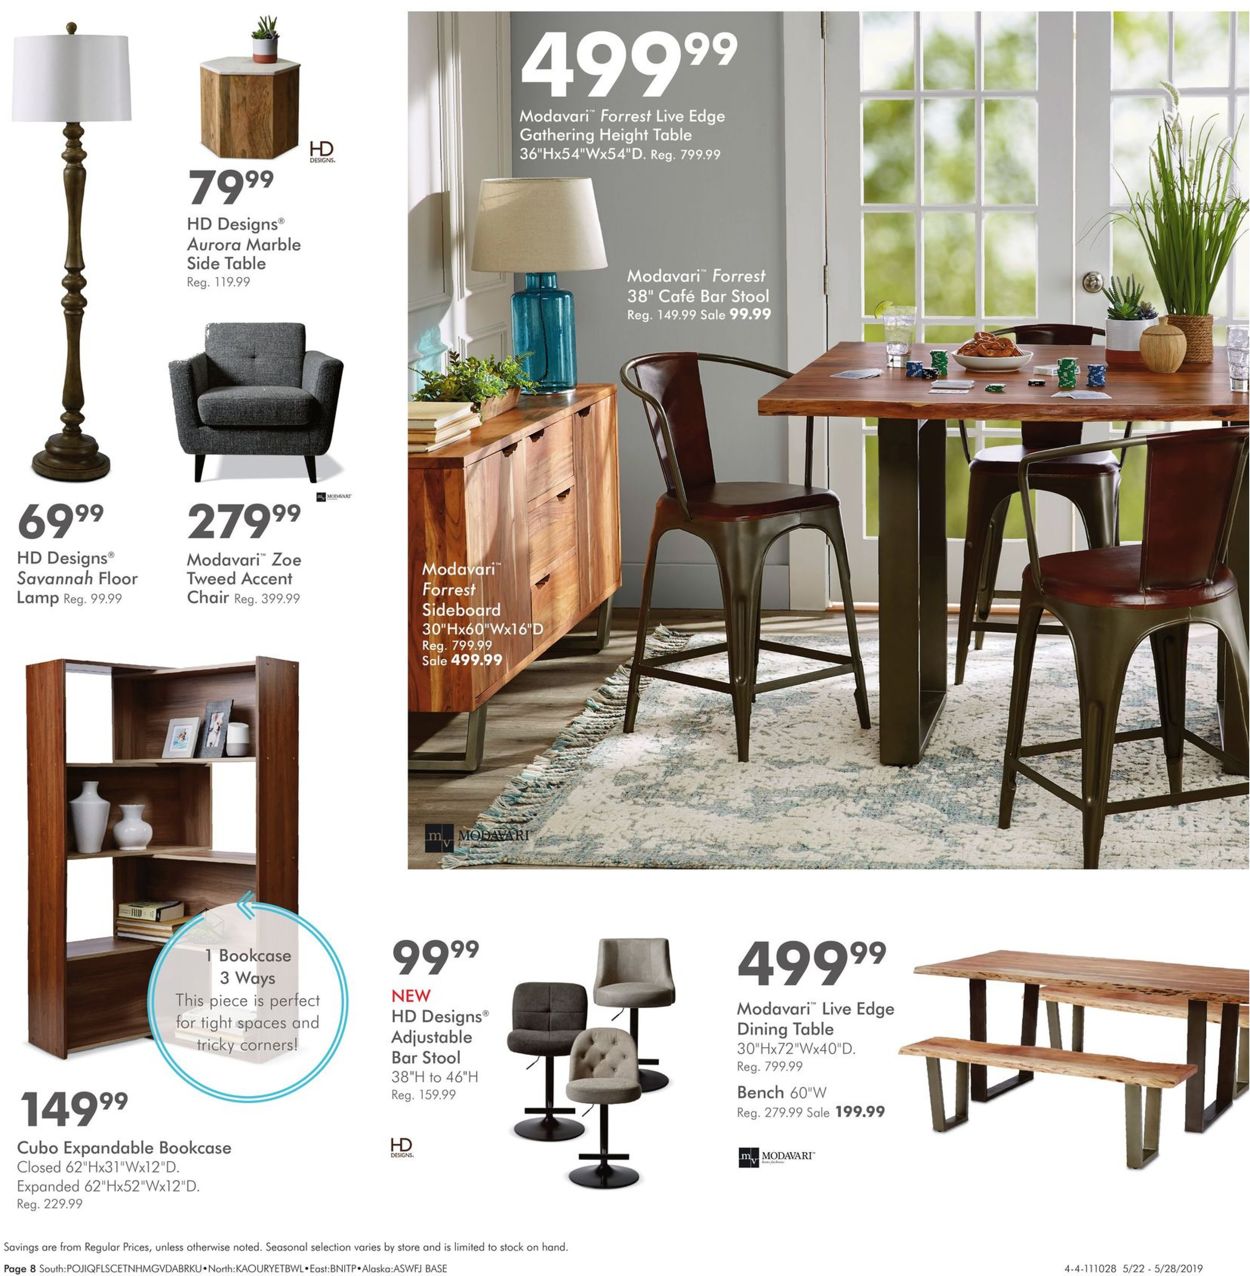 Catalogue Fred Meyer from 05/22/2019